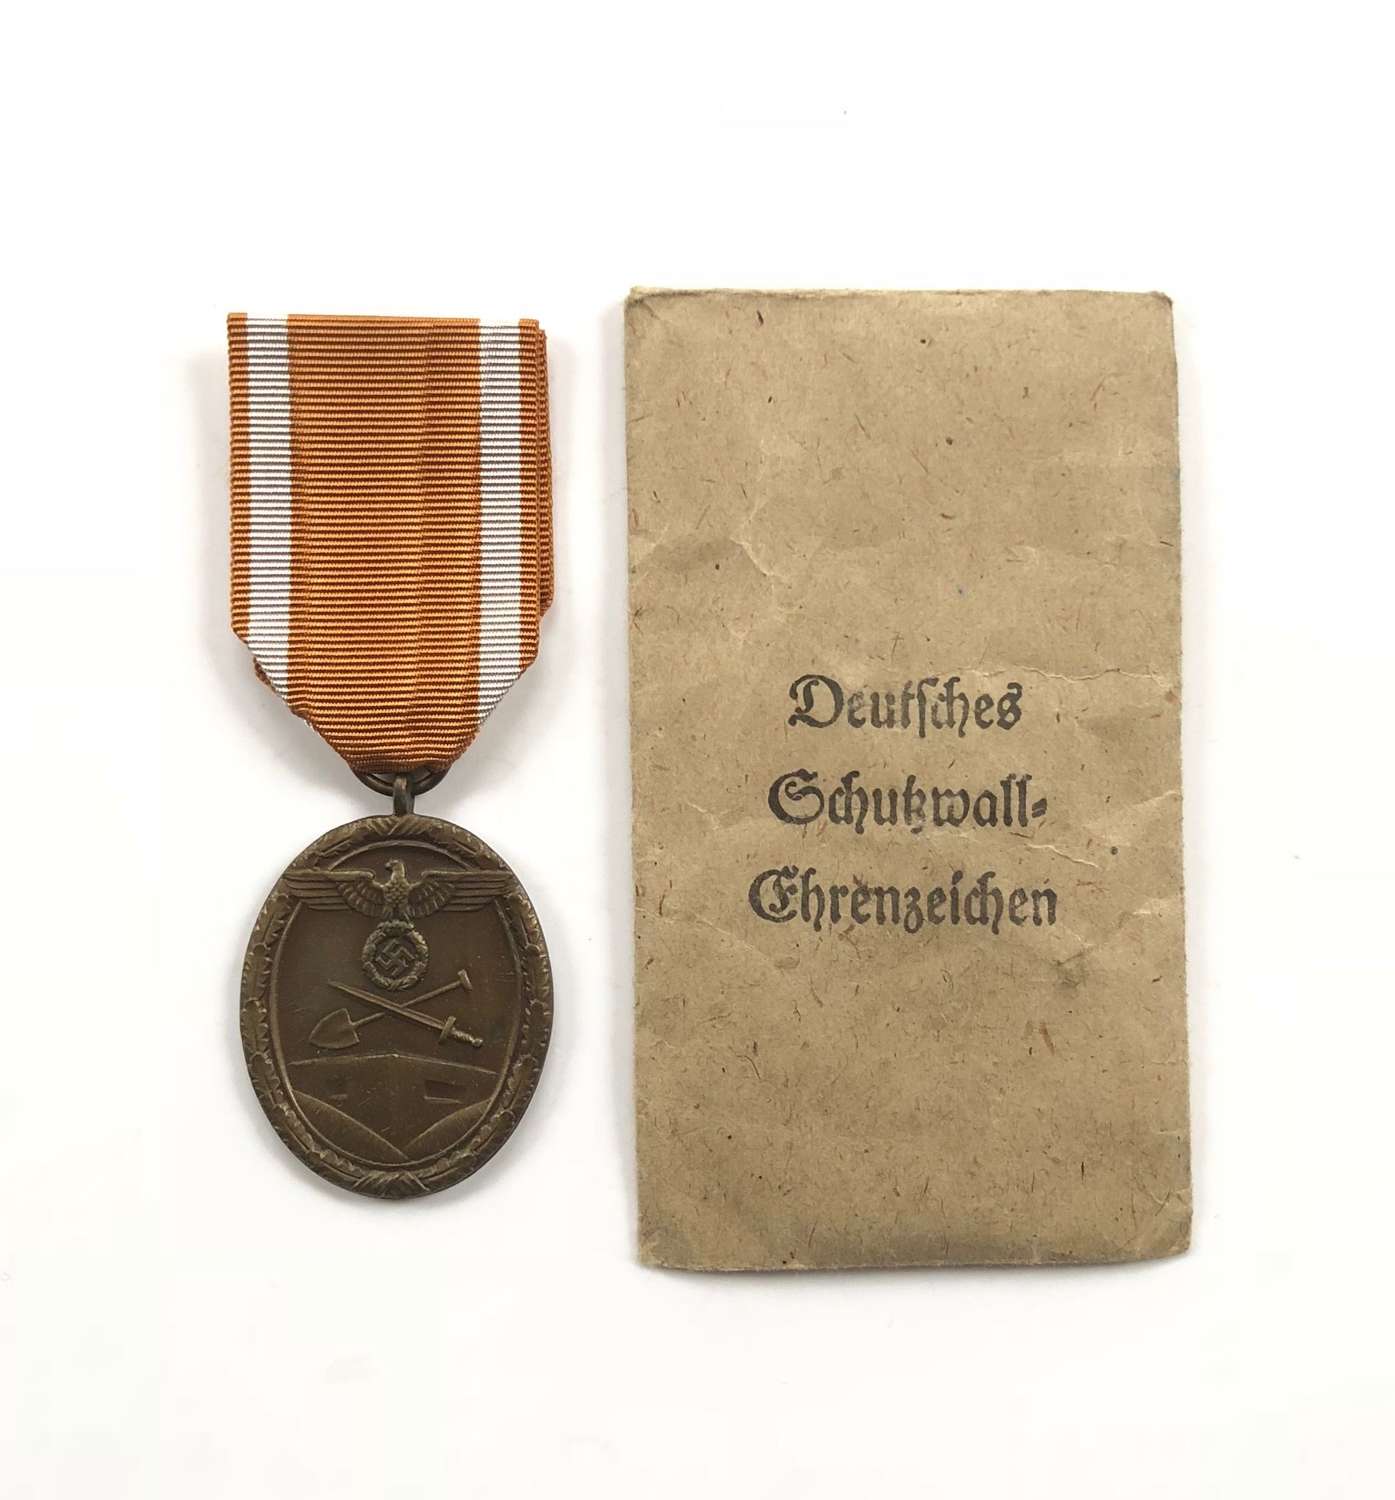 WW2 German West Wall Medal and original packet.